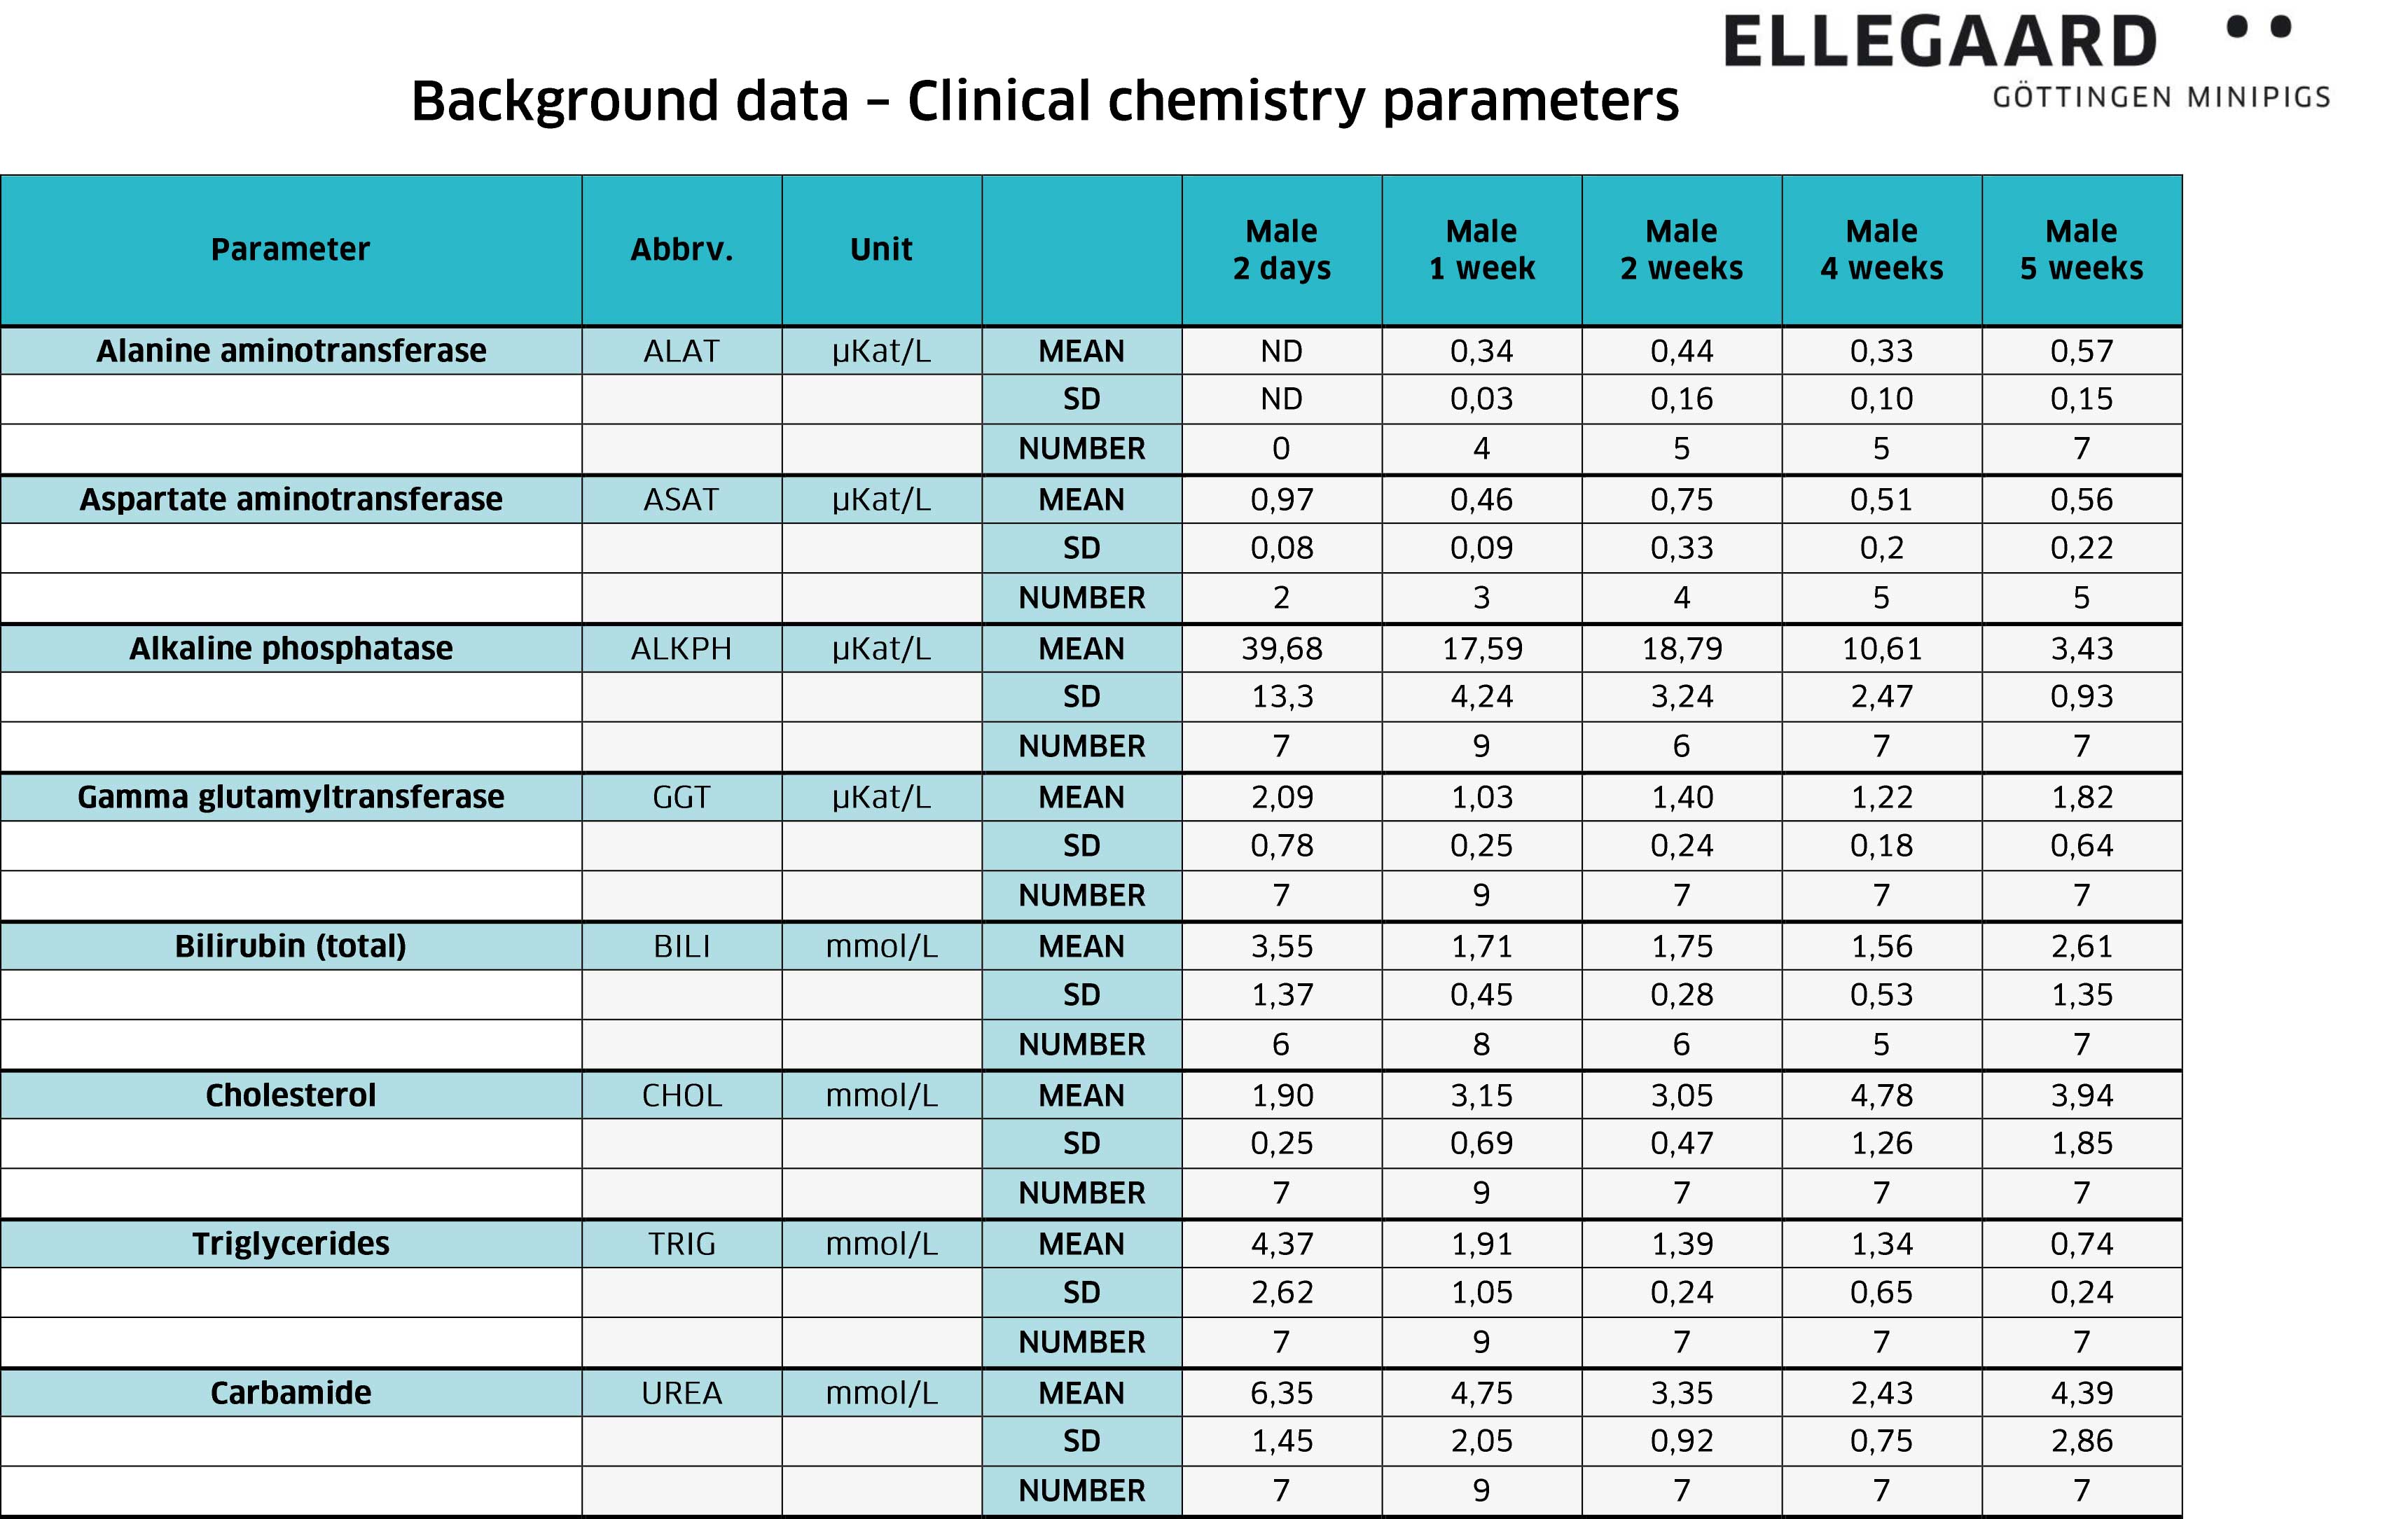 Clinical chemistry parameters for males